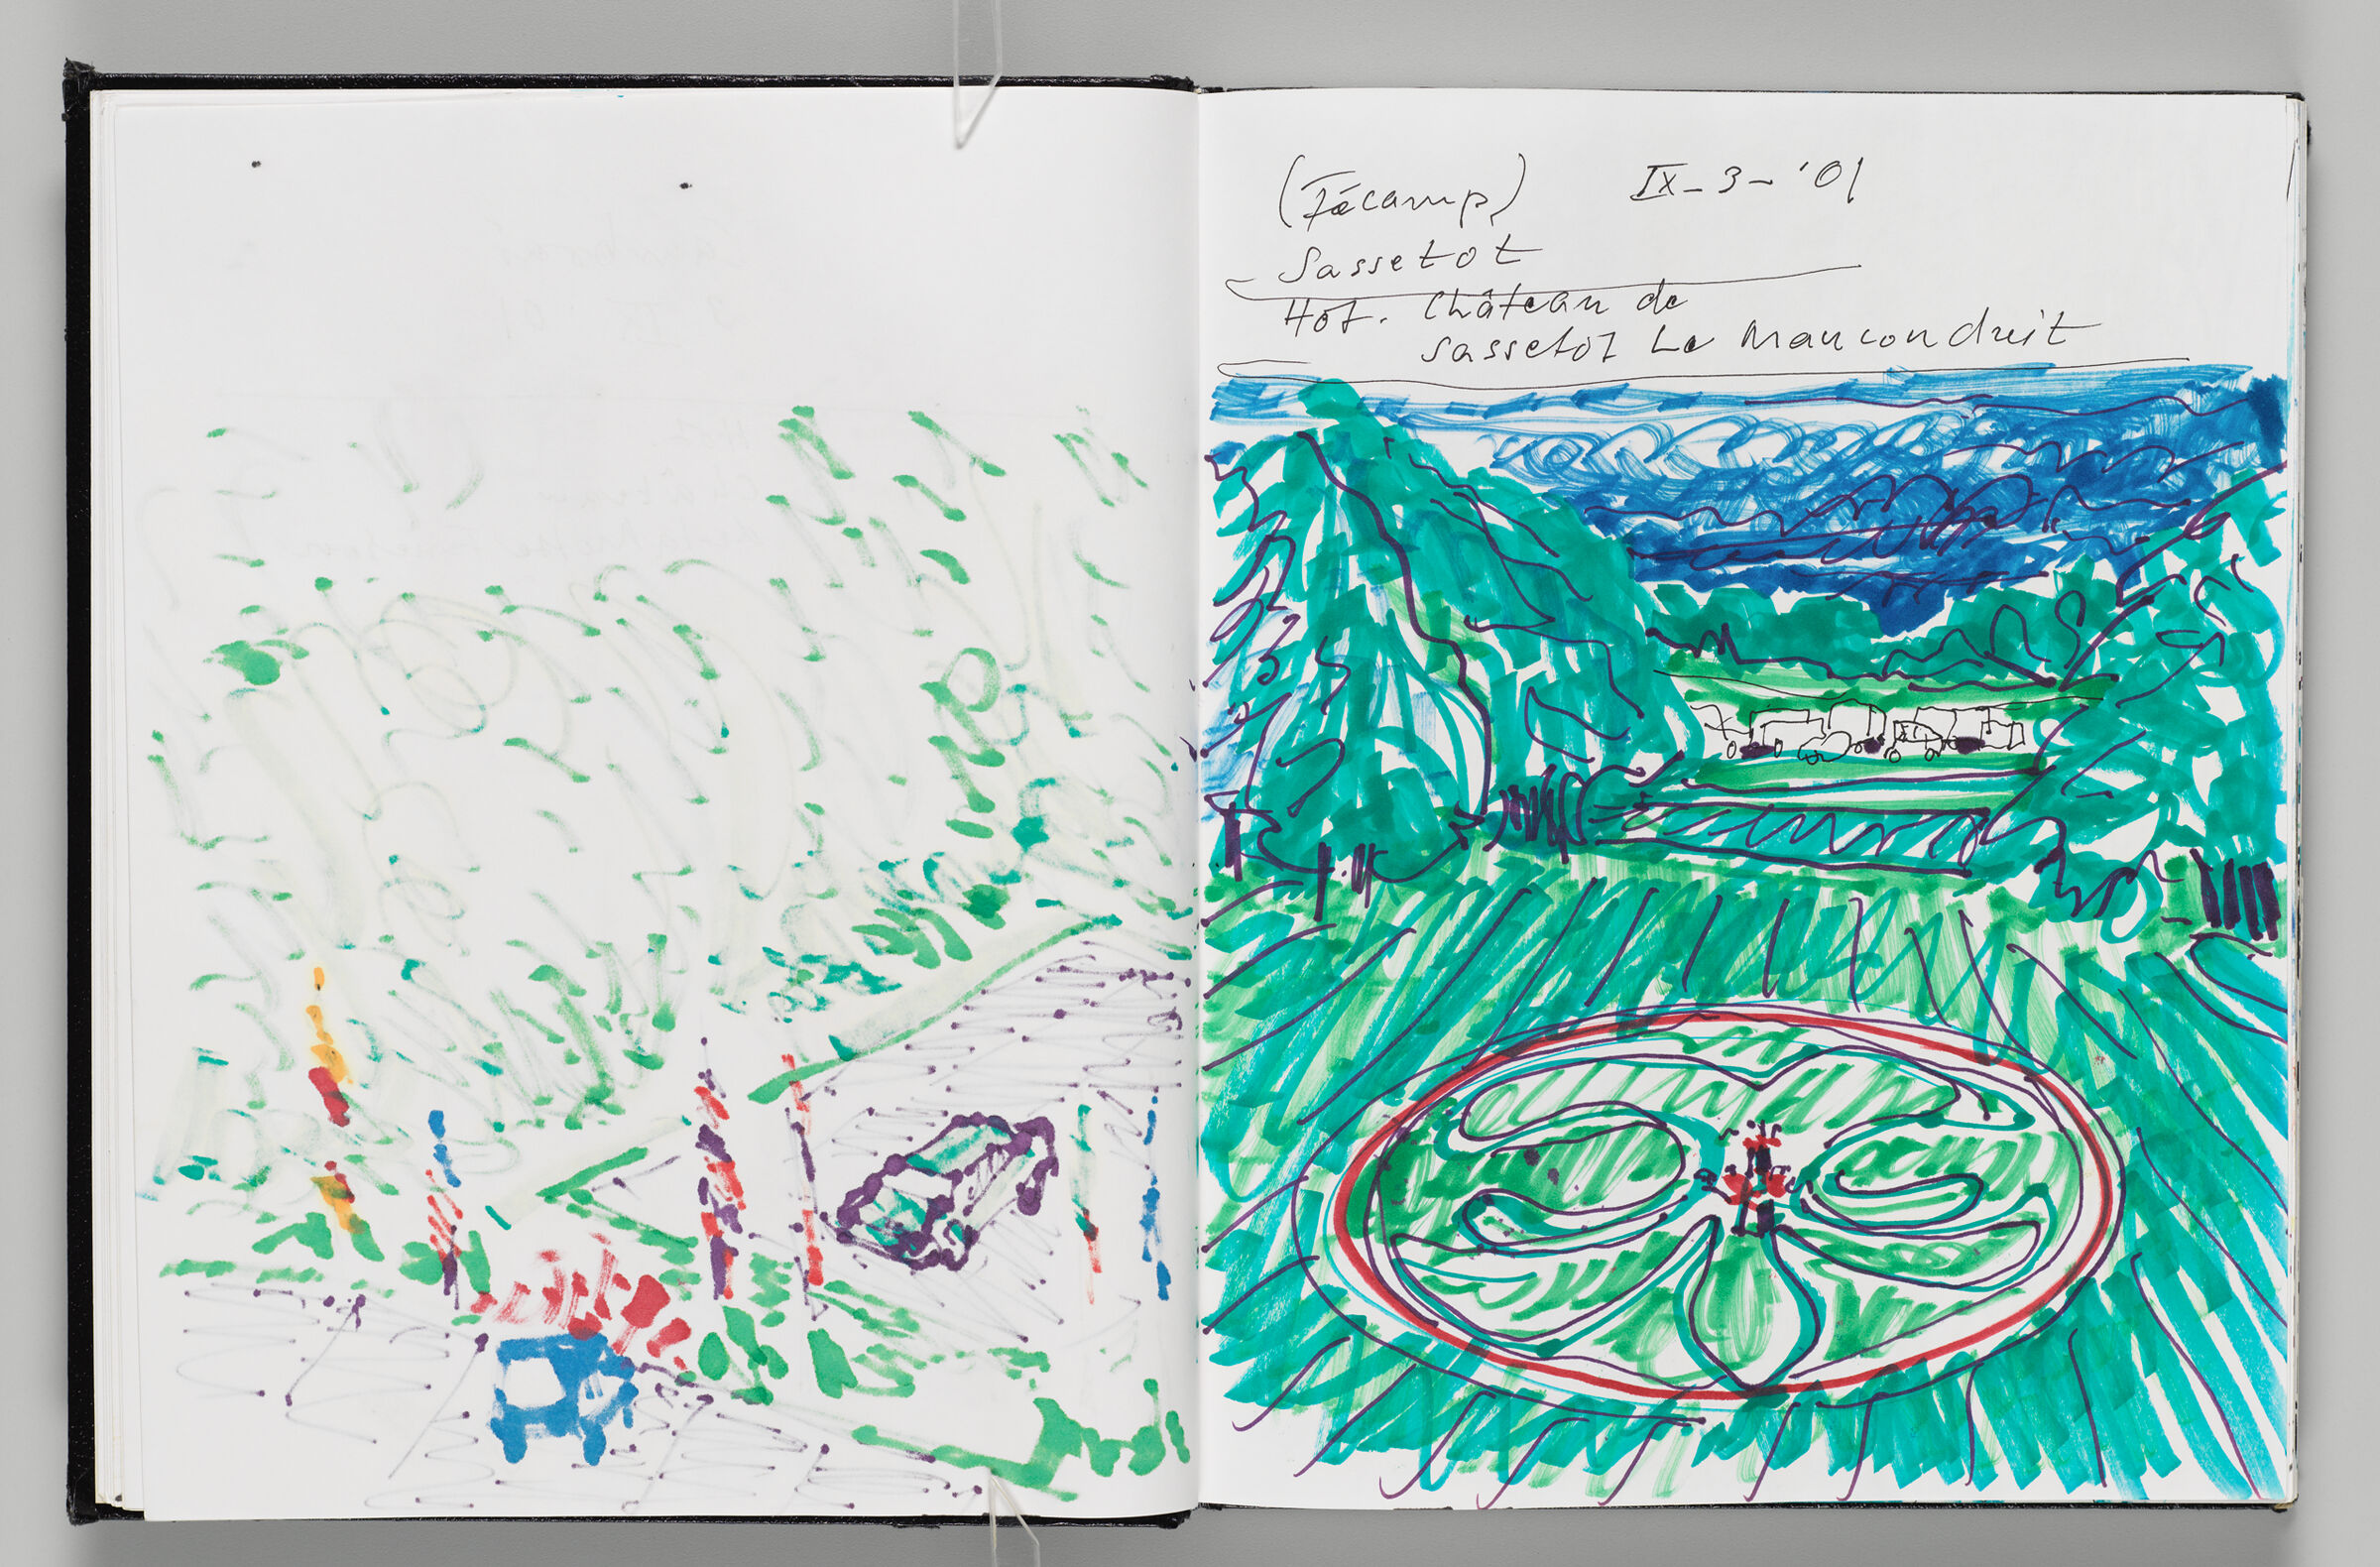 Untitled (Bleed-Through Of Previous Page, Left Page); Untitled (Garden In Sassetot, France, Right Page)